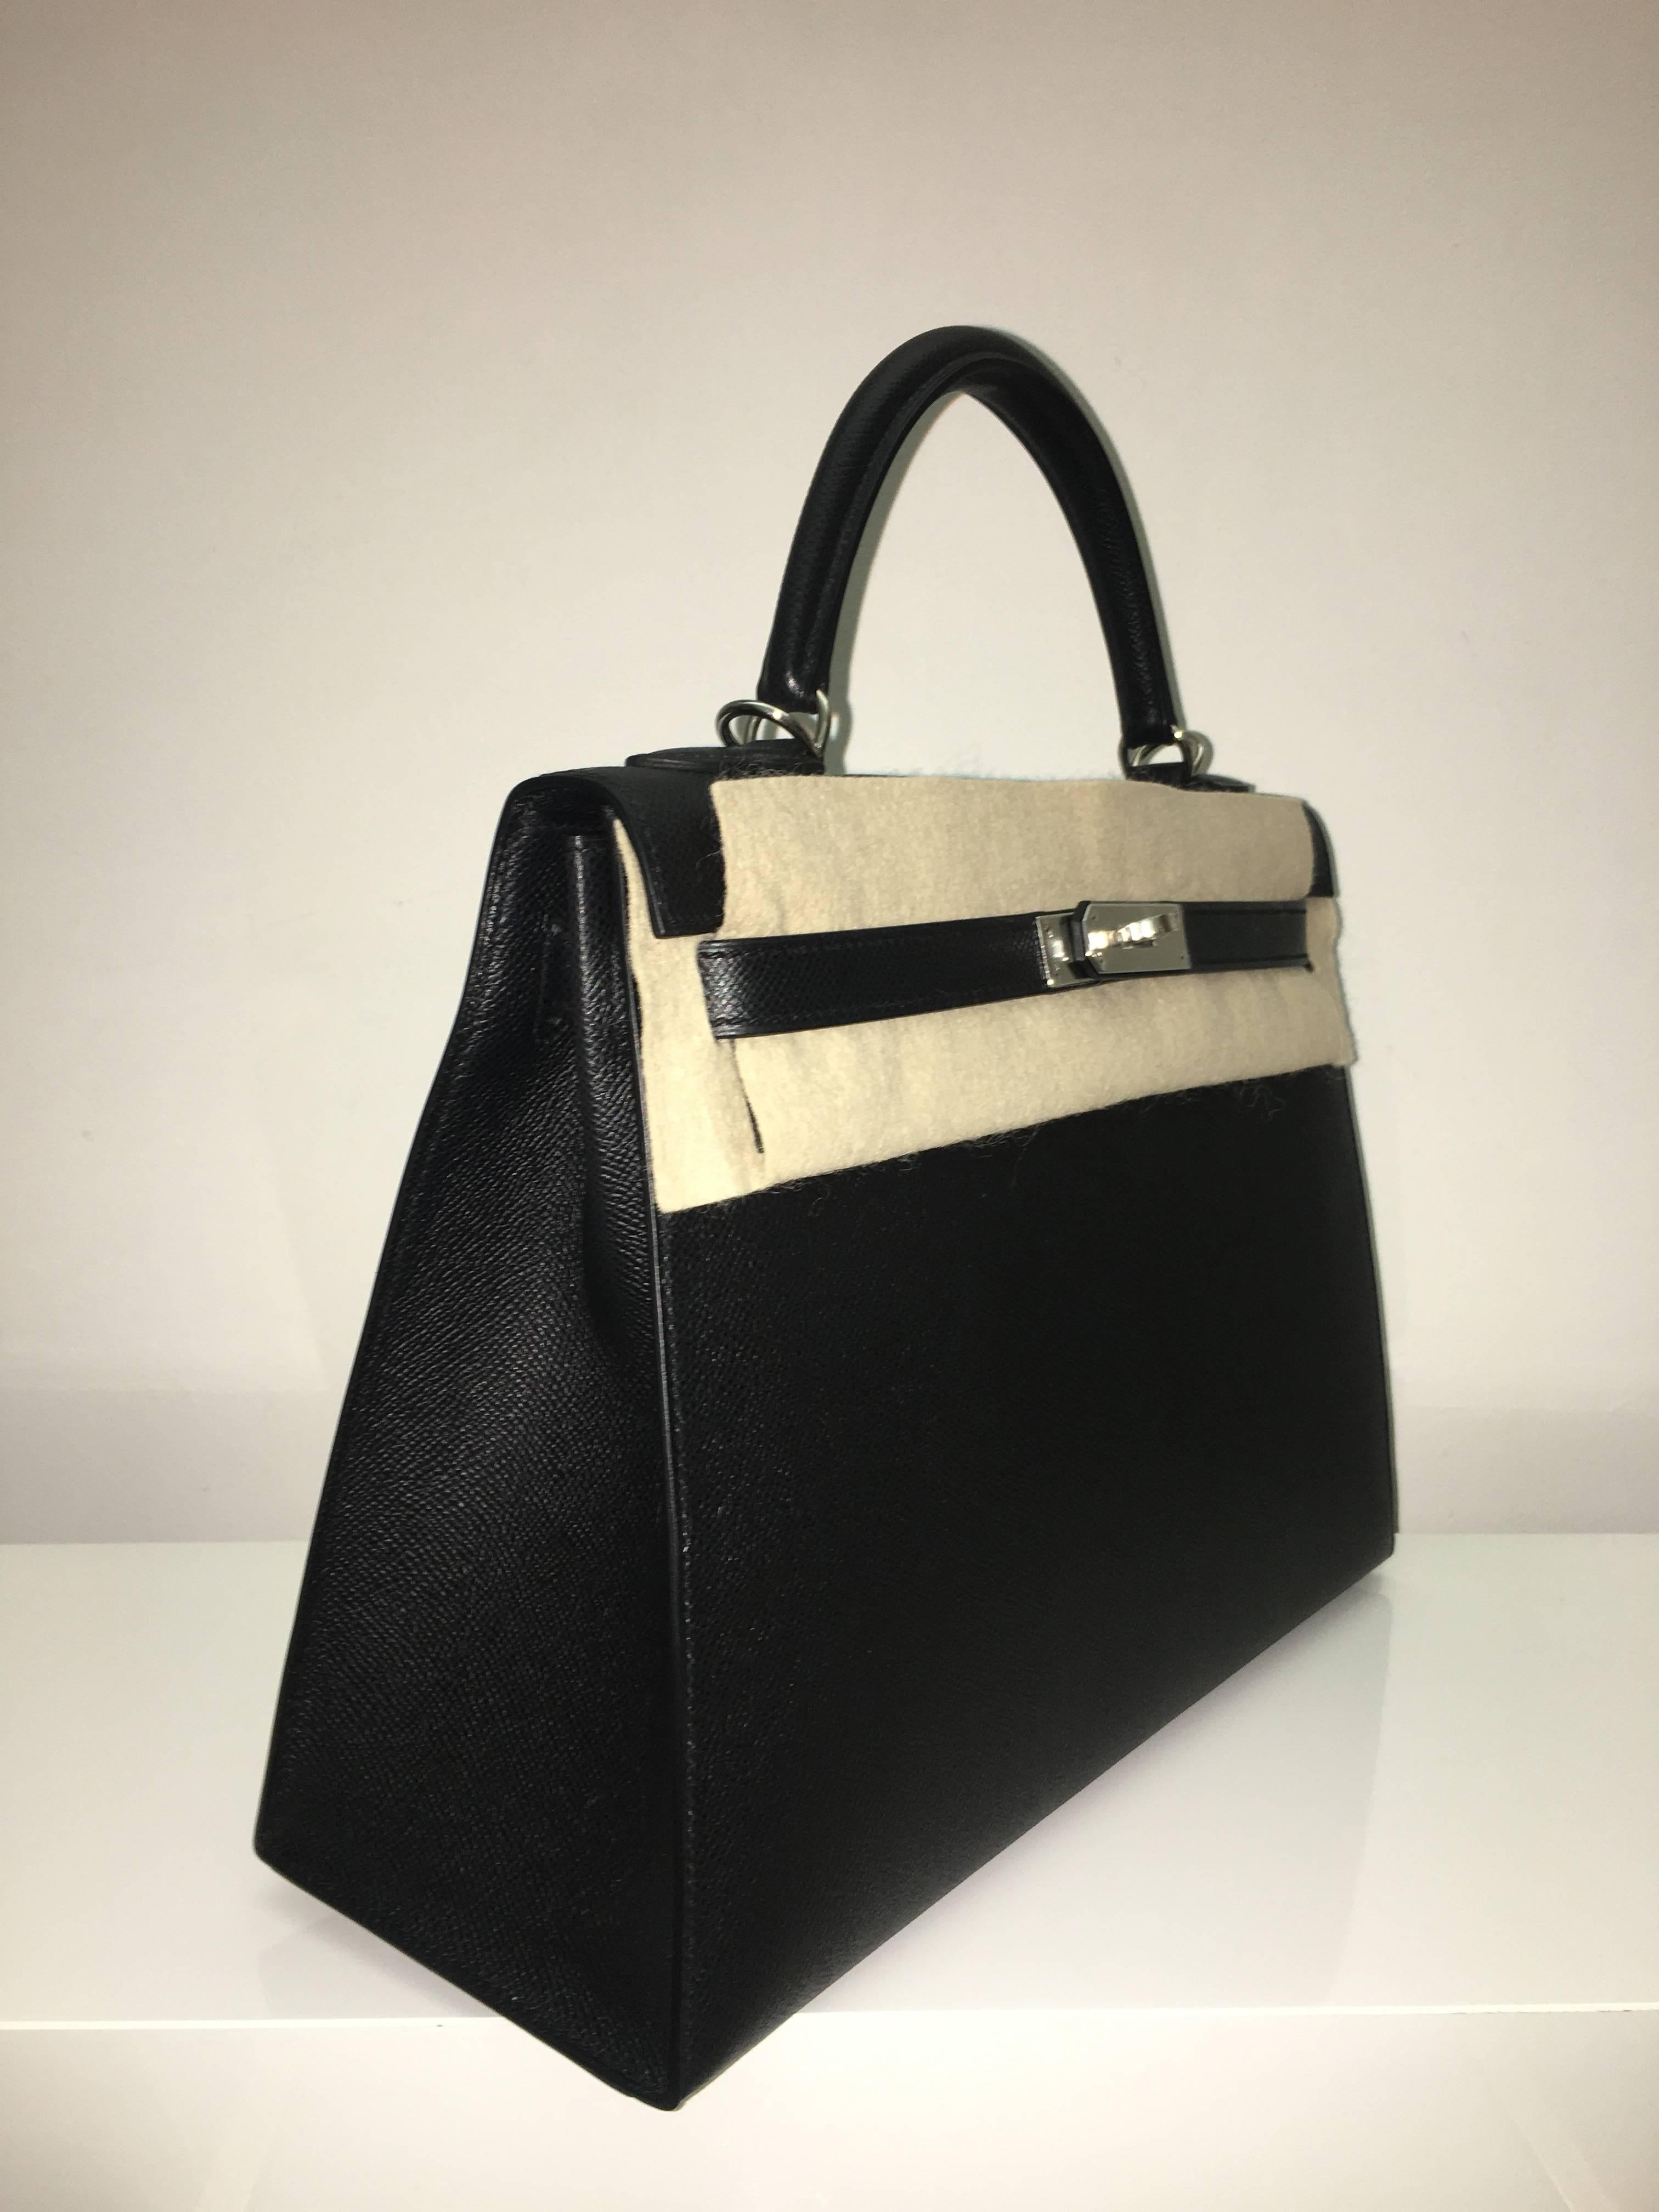 Hermes 
Kelly Size 32
epsom Leather 
Colour black
Silver (palladium) Hardware 
store fresh, comes with receipt and full set (dust bag, box...) 
Hydeparkfashion specializes in sourcing and delivering authentic luxury handbags, mainly Hermes, to